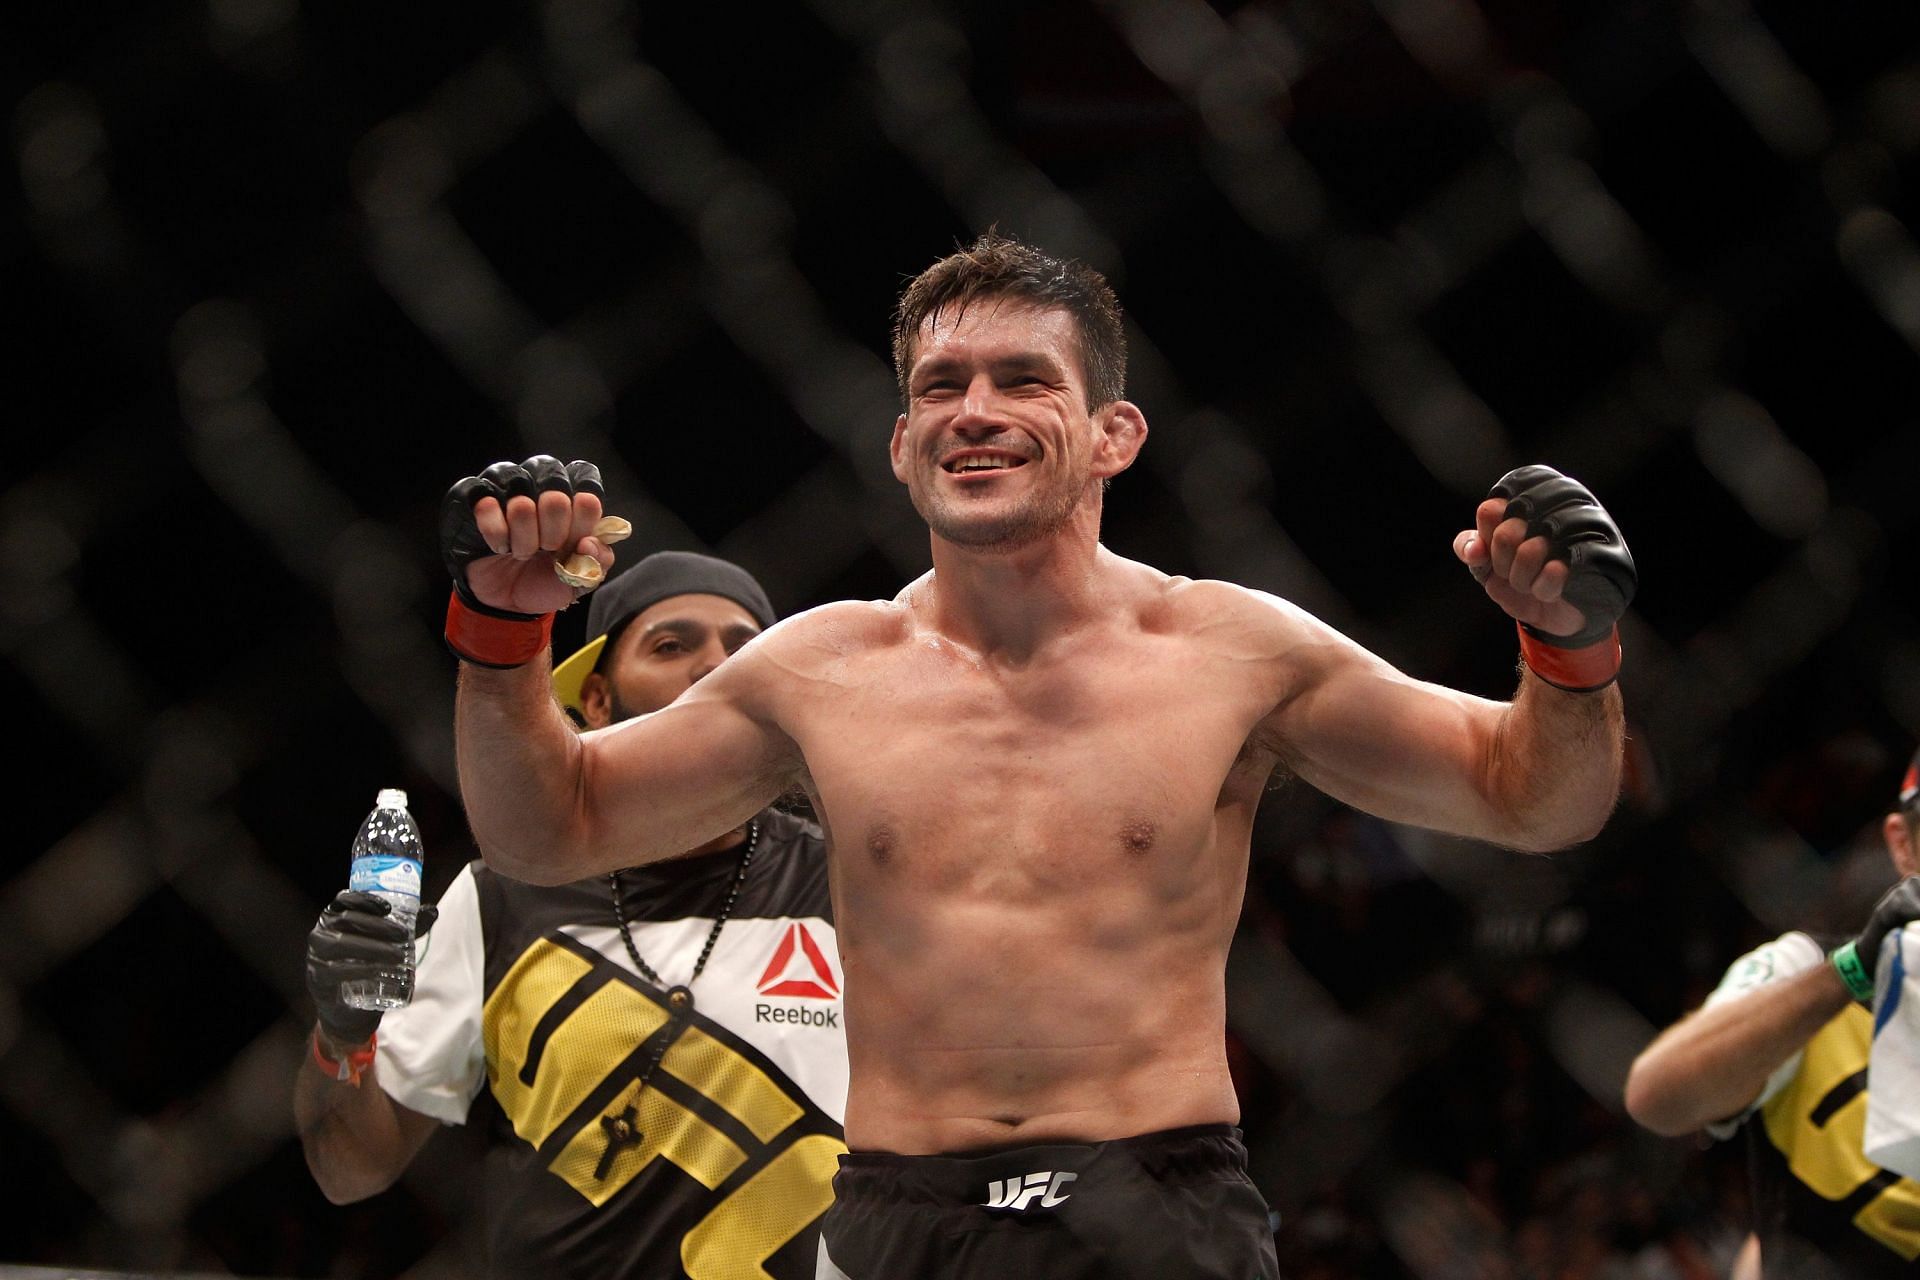 Demian Maia met his grappling match when he faced Jake Shields in 2013